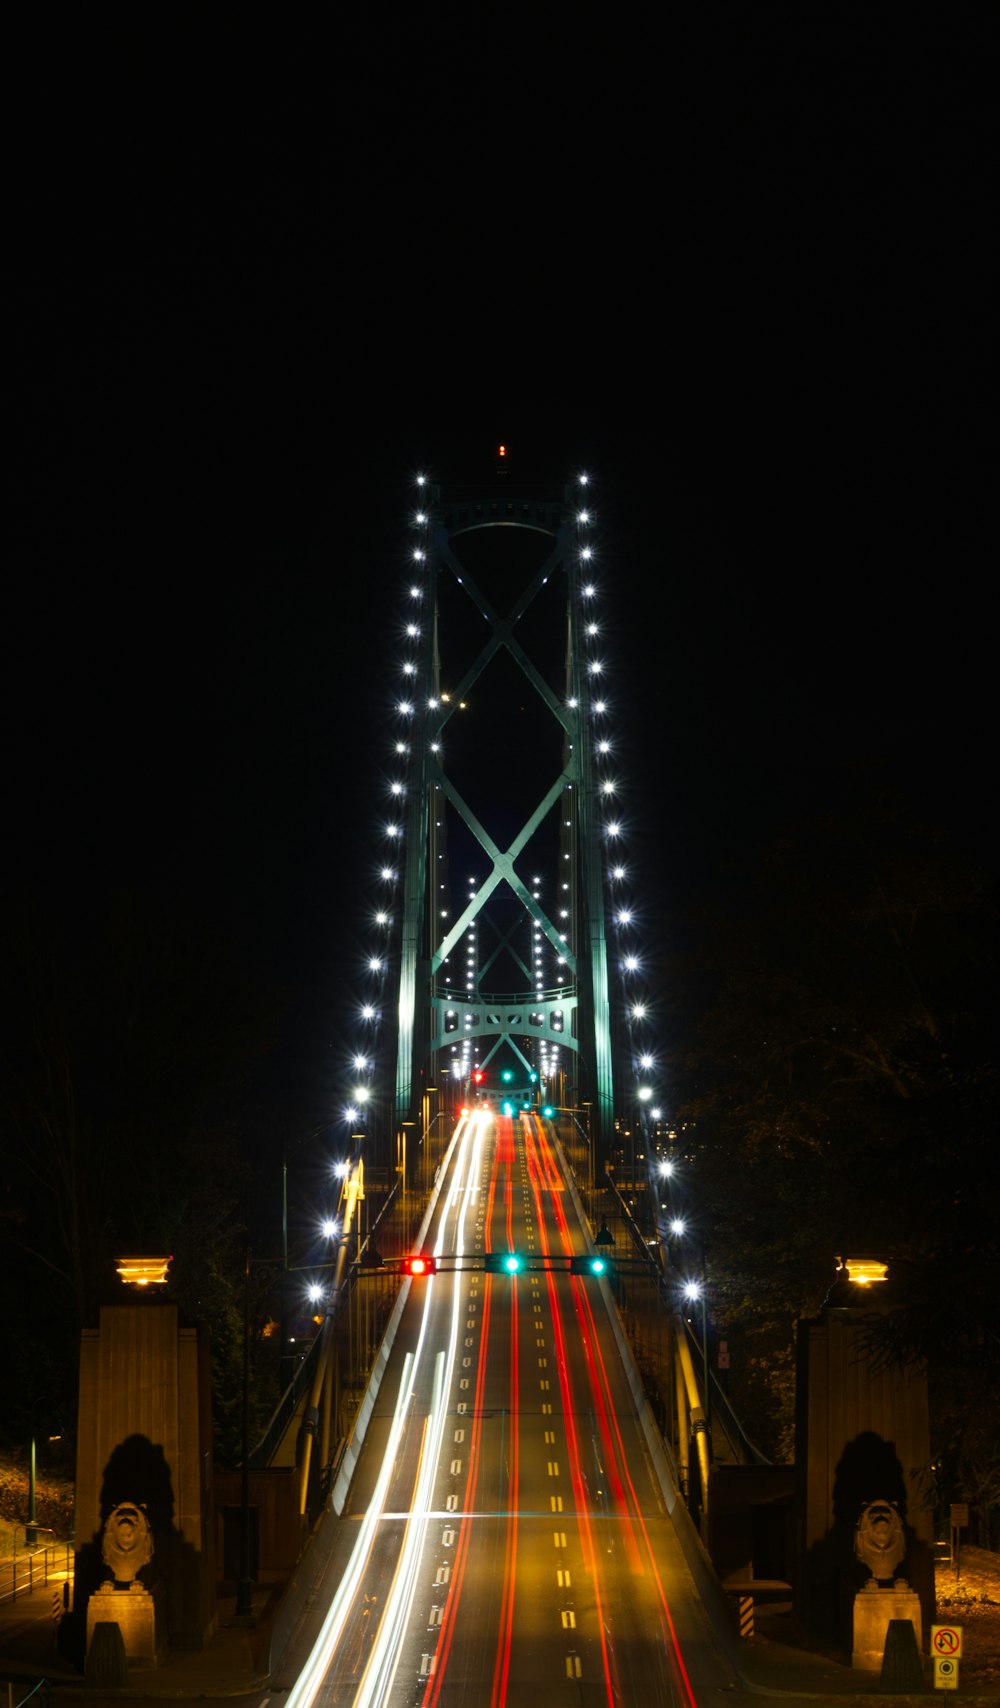 blue lighted bridge during night time